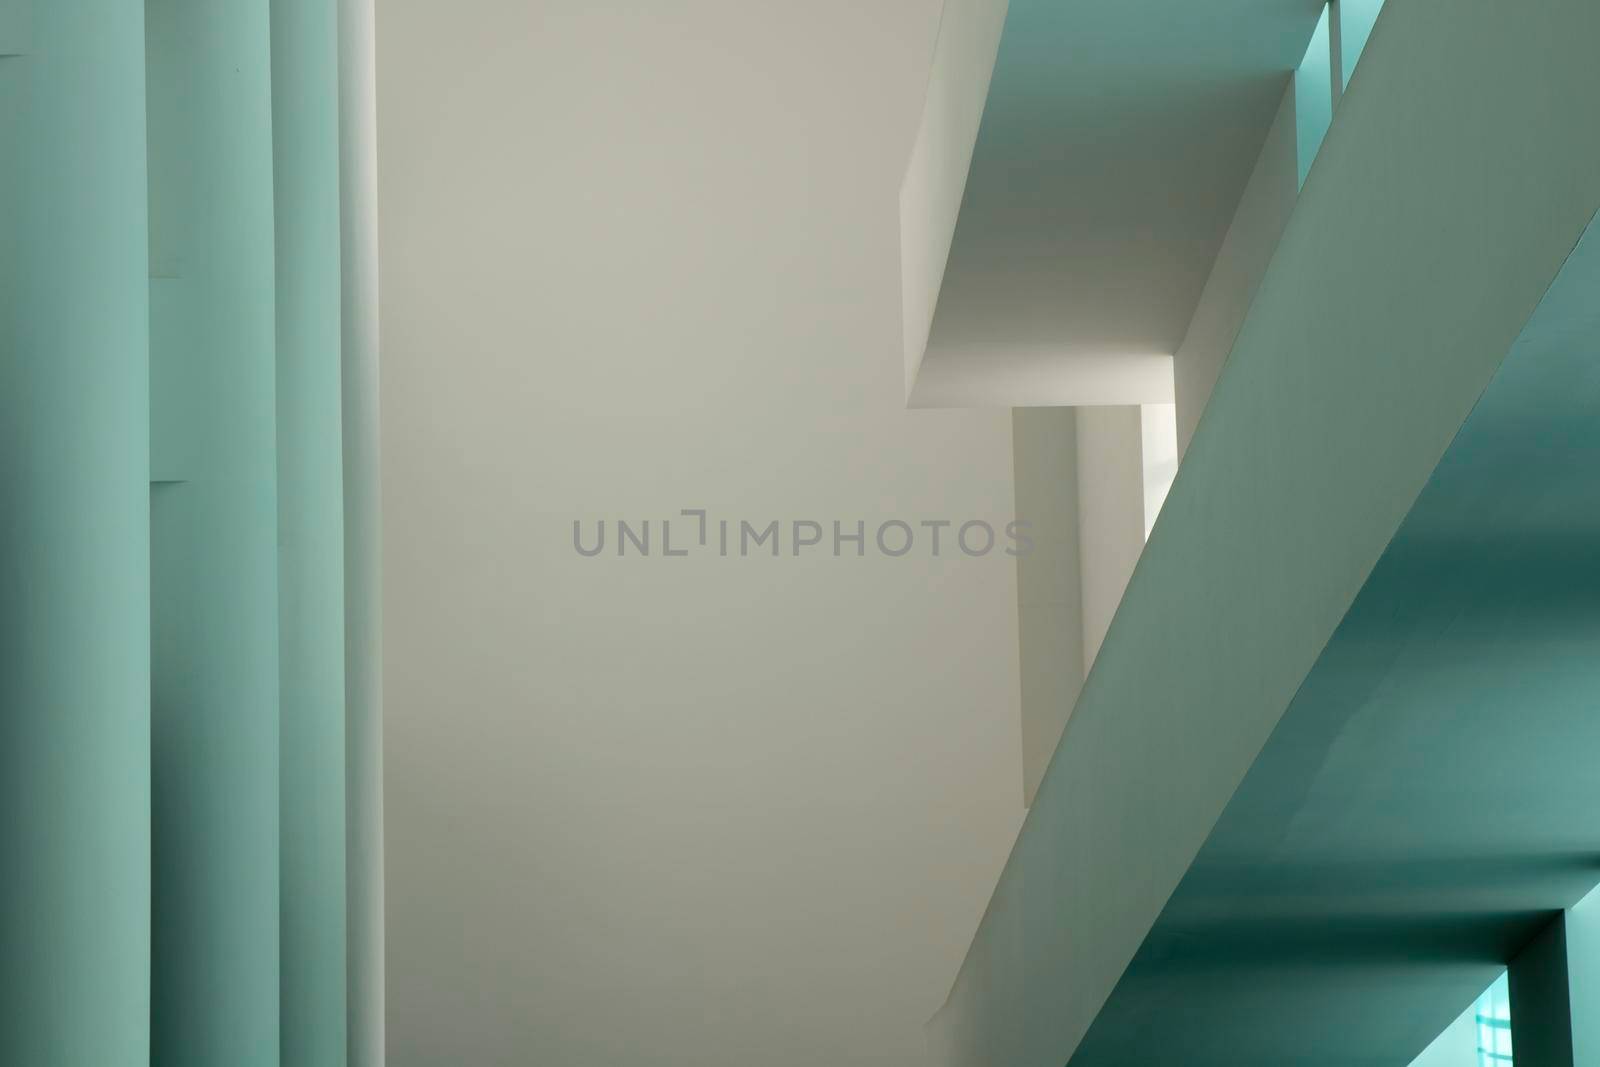 Minimalistic picture in a museum by ValentimePix